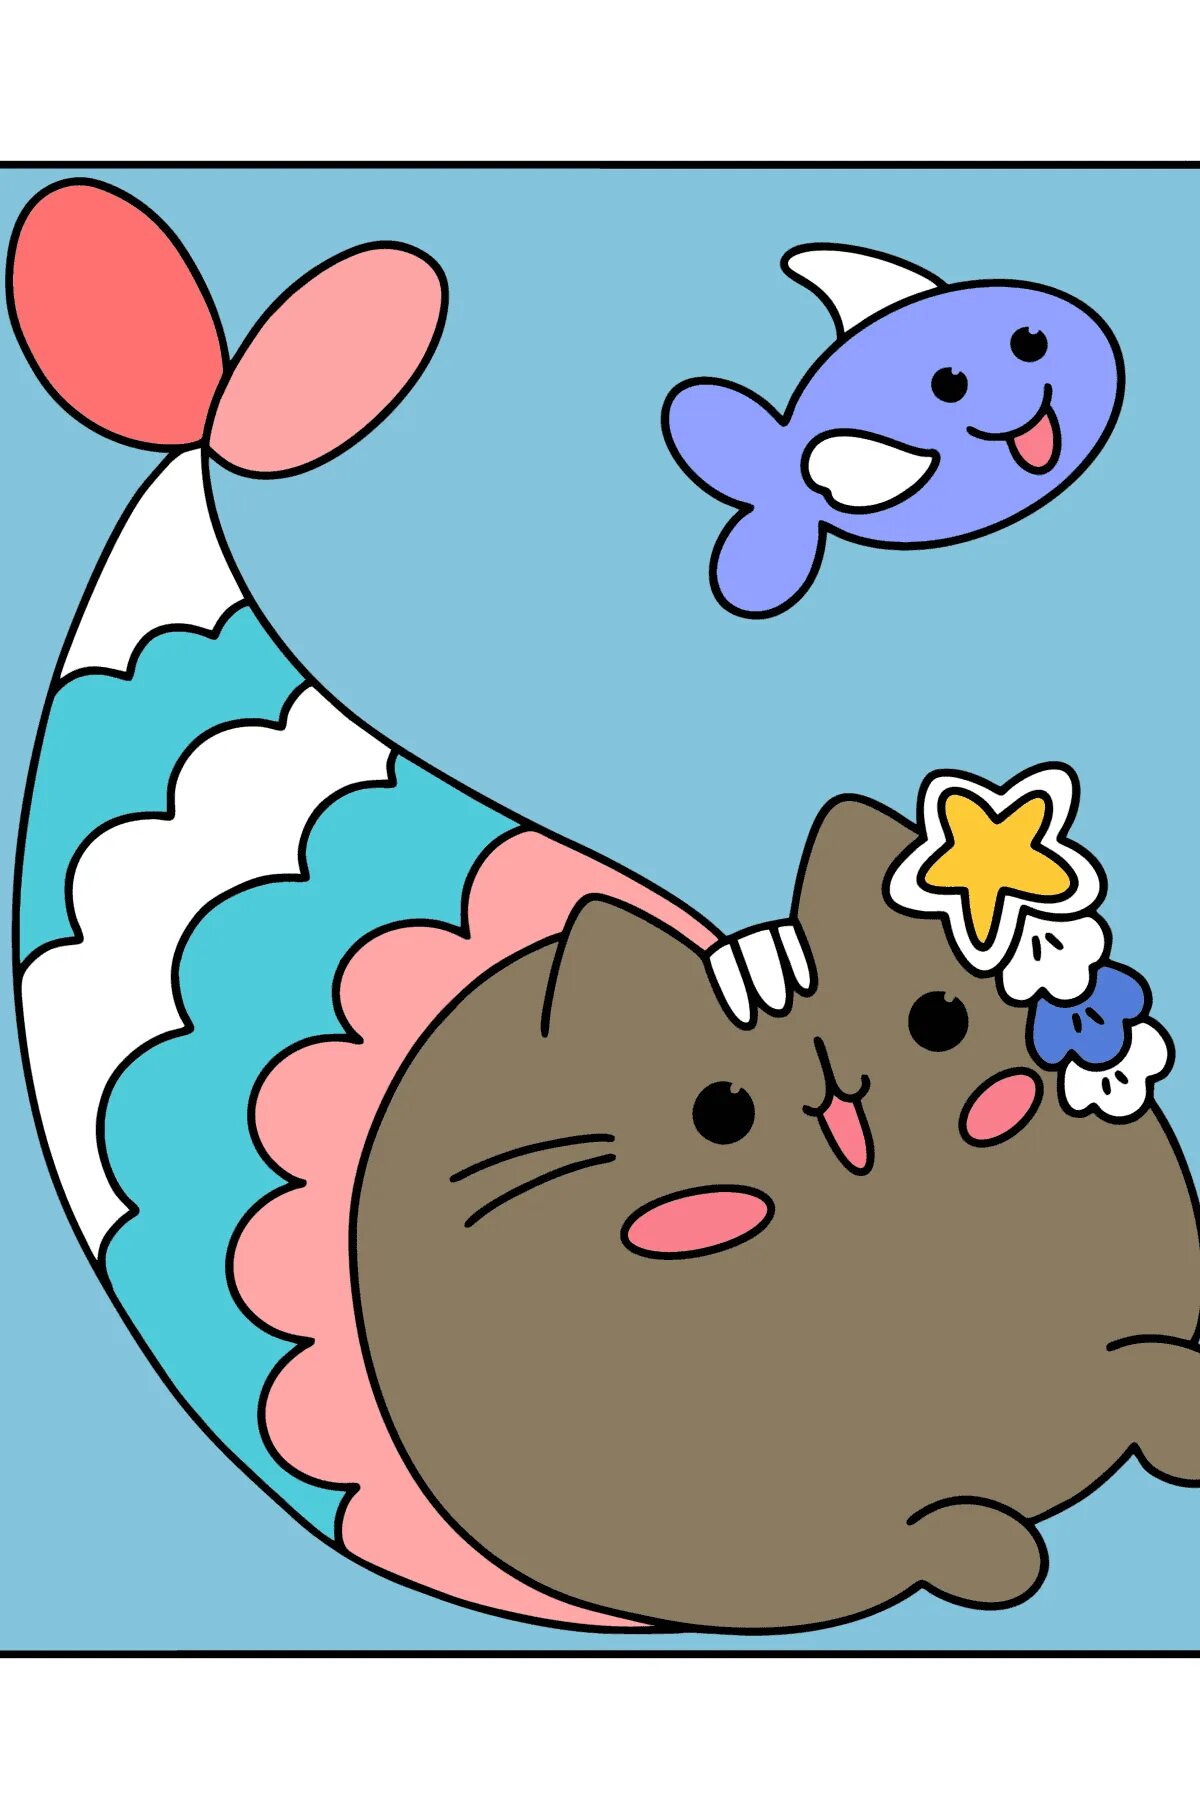 Exciting pusheen mermaid coloring page